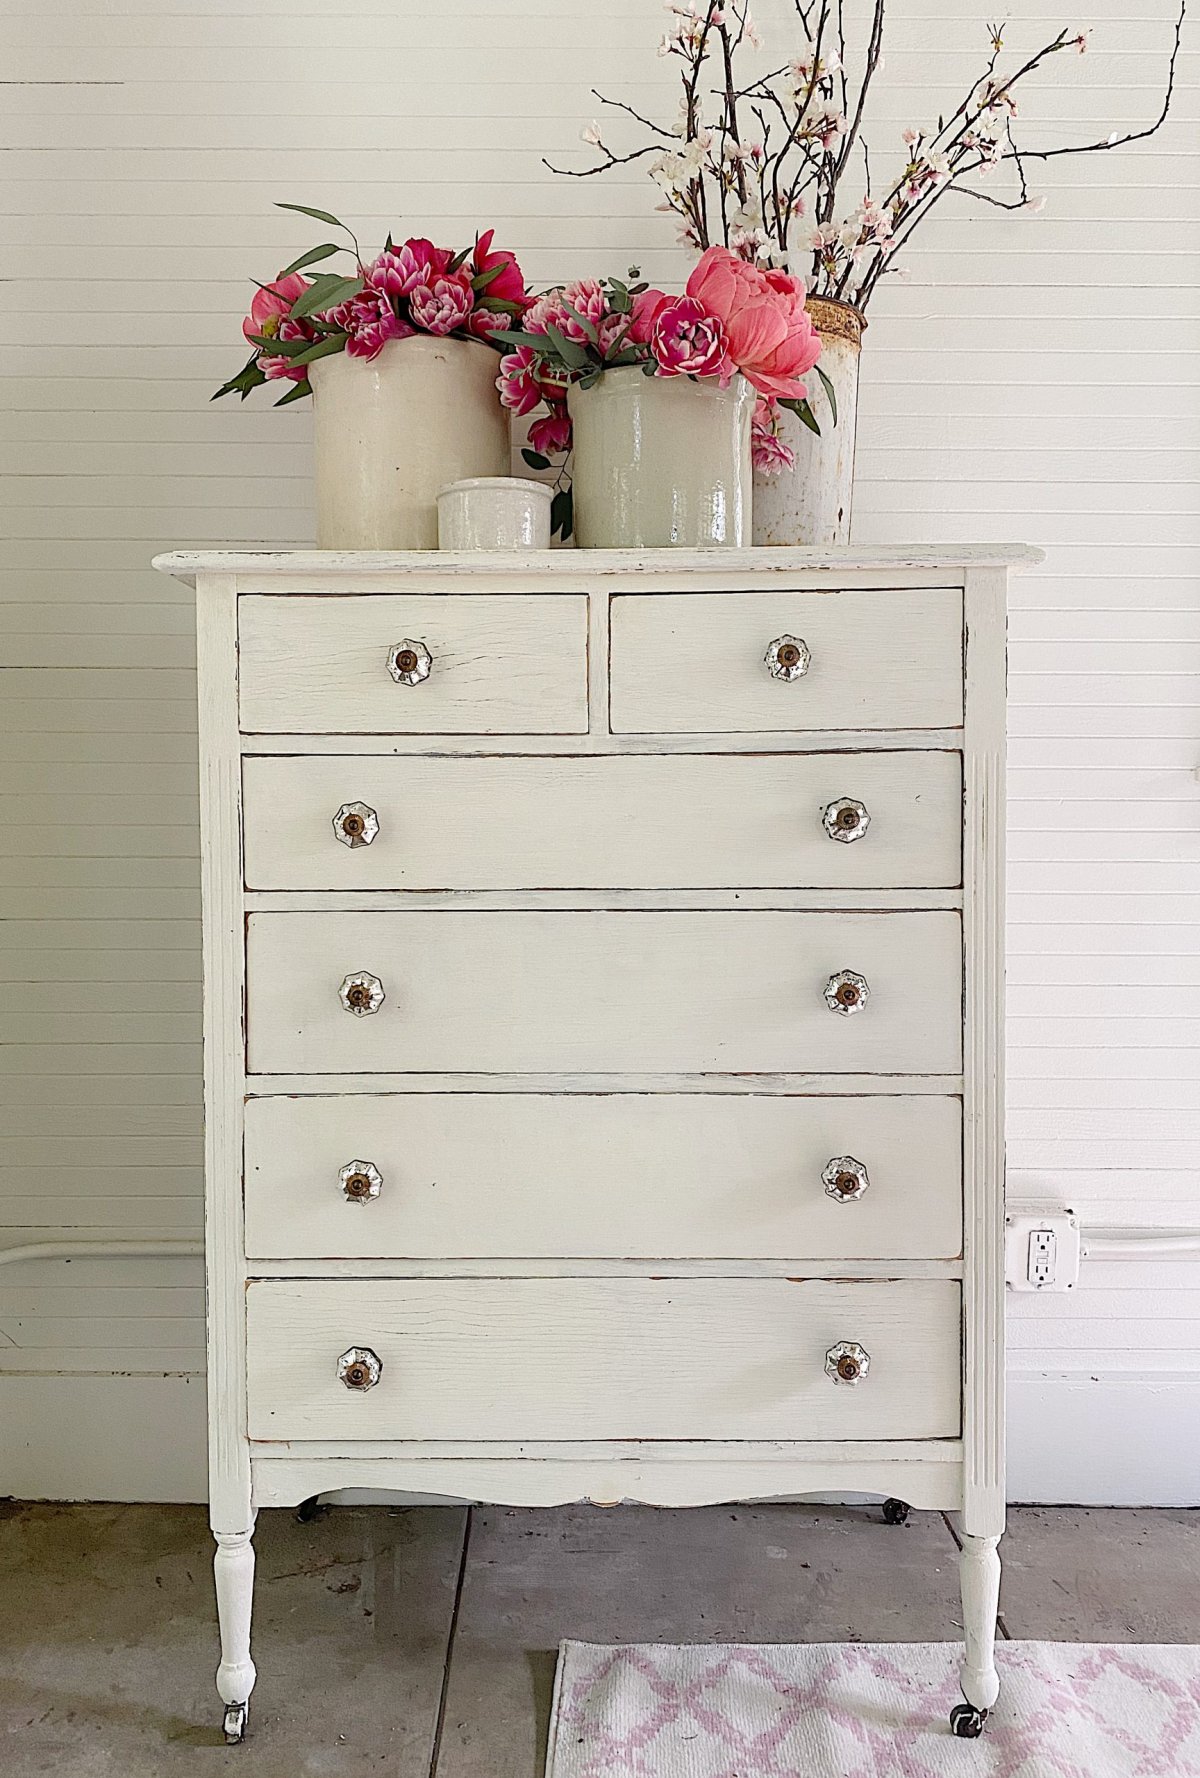 How To Paint With Milk Paint Furniture - Image to u